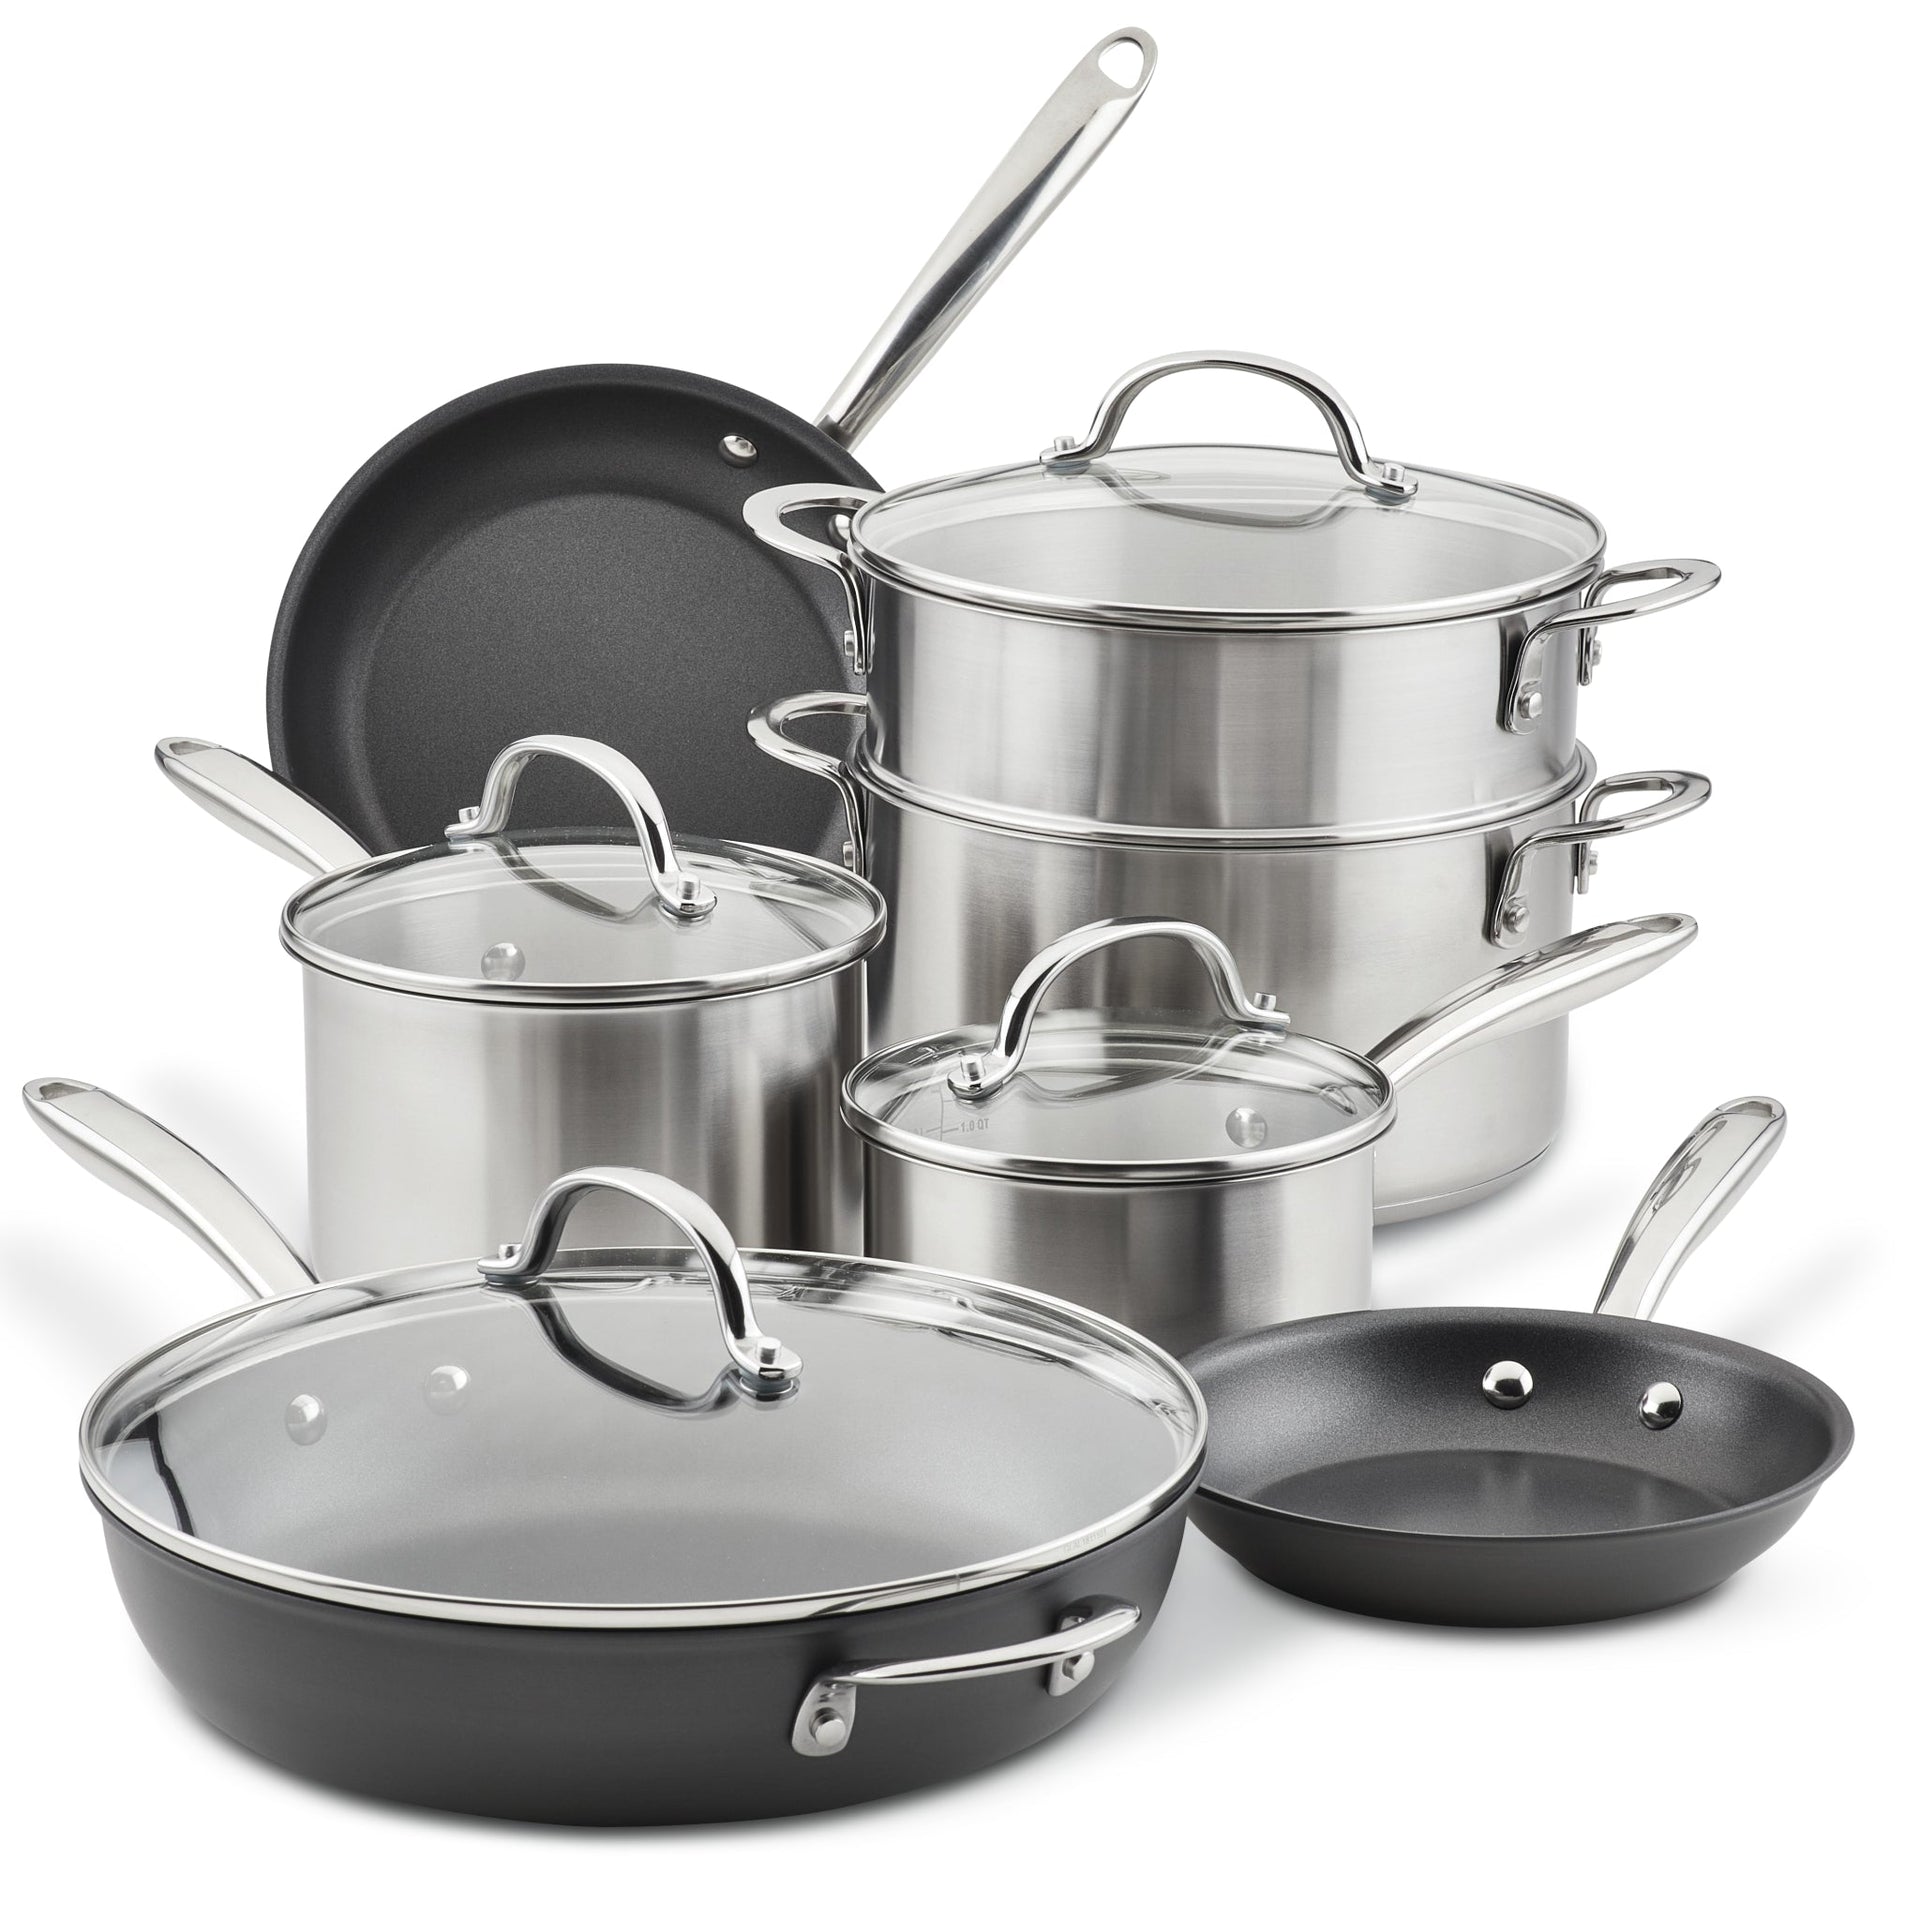 Cook N Home Stainless Cookware Sets Basic Pots and Pans, 12-Piece,  Stainless Steel Grey Silicone Handle